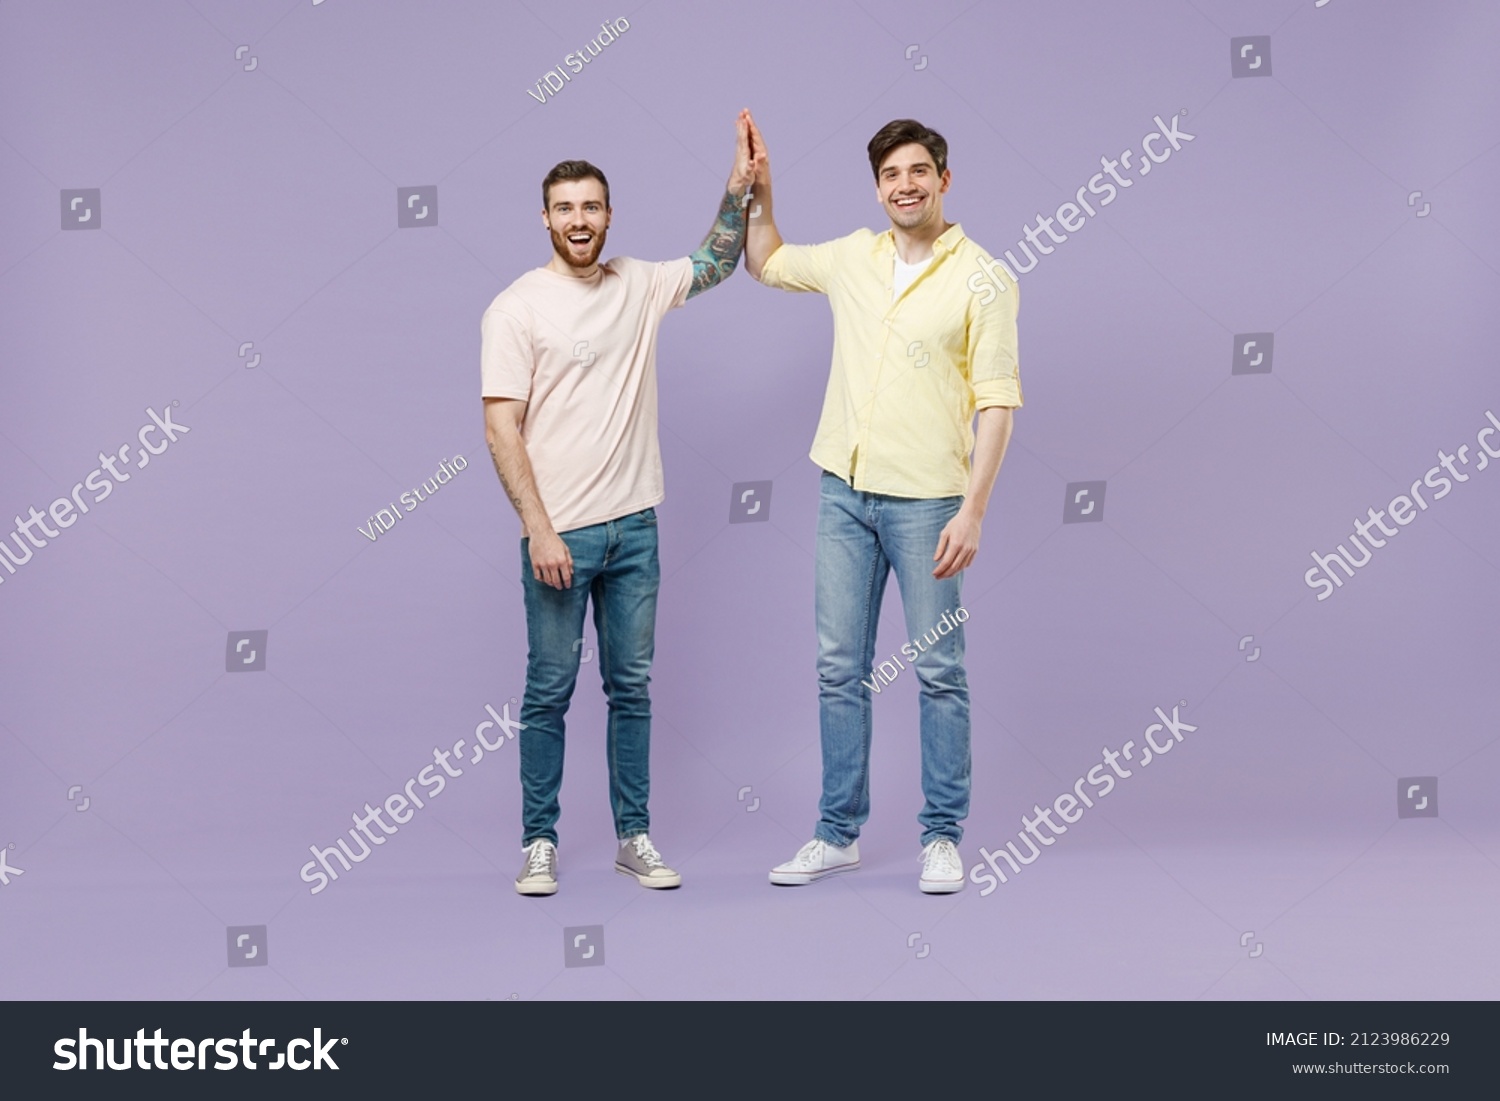 Full size length two young smiling happy men friends together in casual t-shirt meeting together greeting give high five clapping hands folded isolated on purple background studio Tattoo translate fun #2123986229